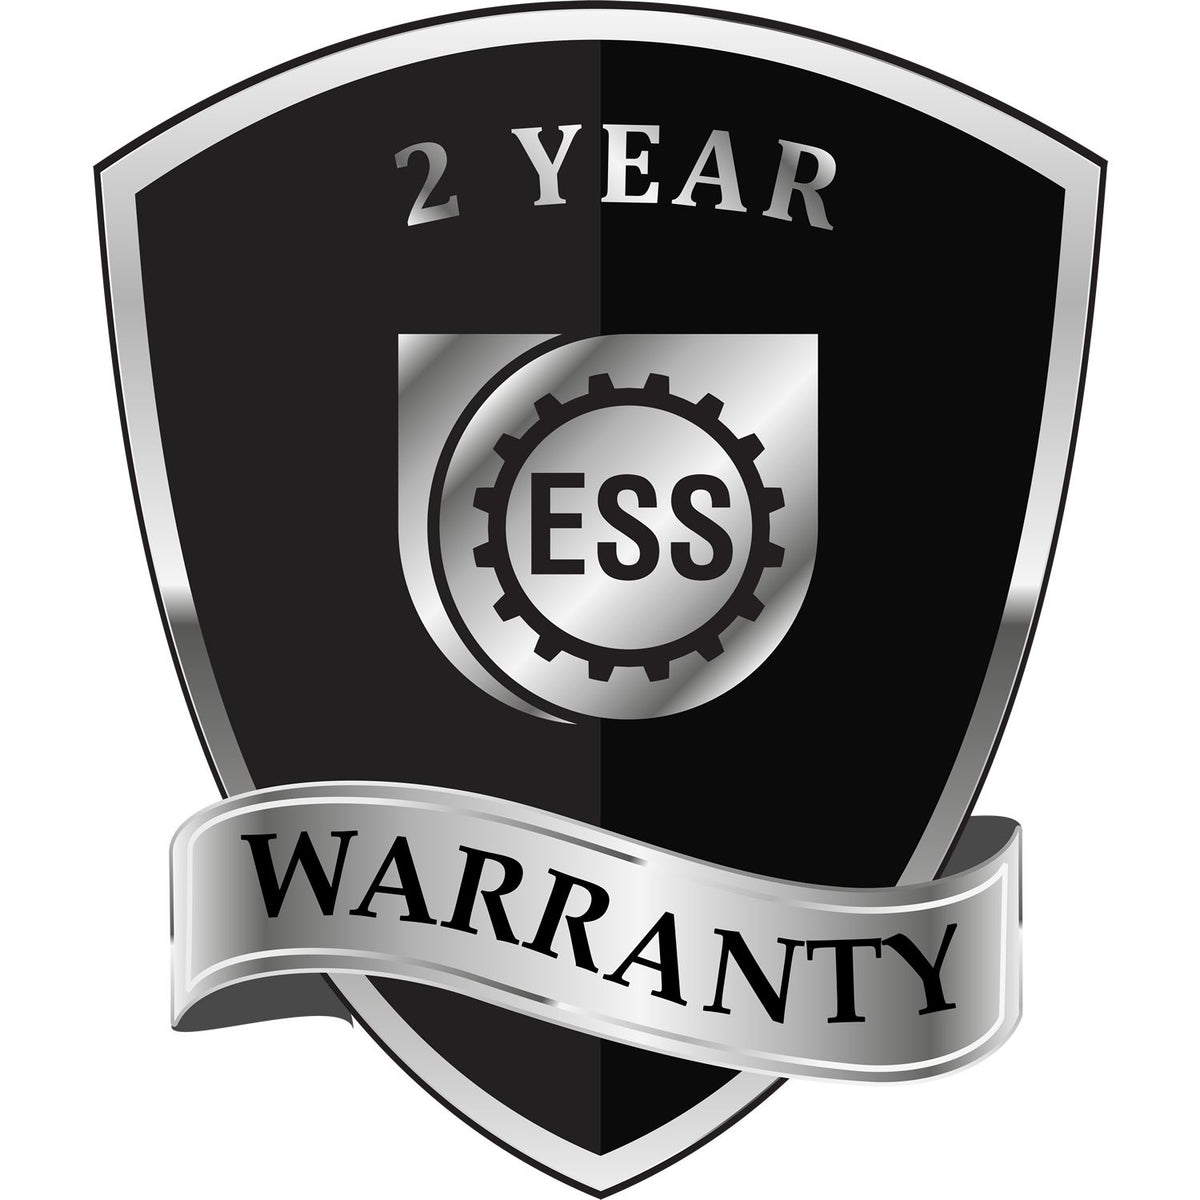 A black and silver badge or emblem showing warranty information for the Hybrid New Hampshire Engineer Seal